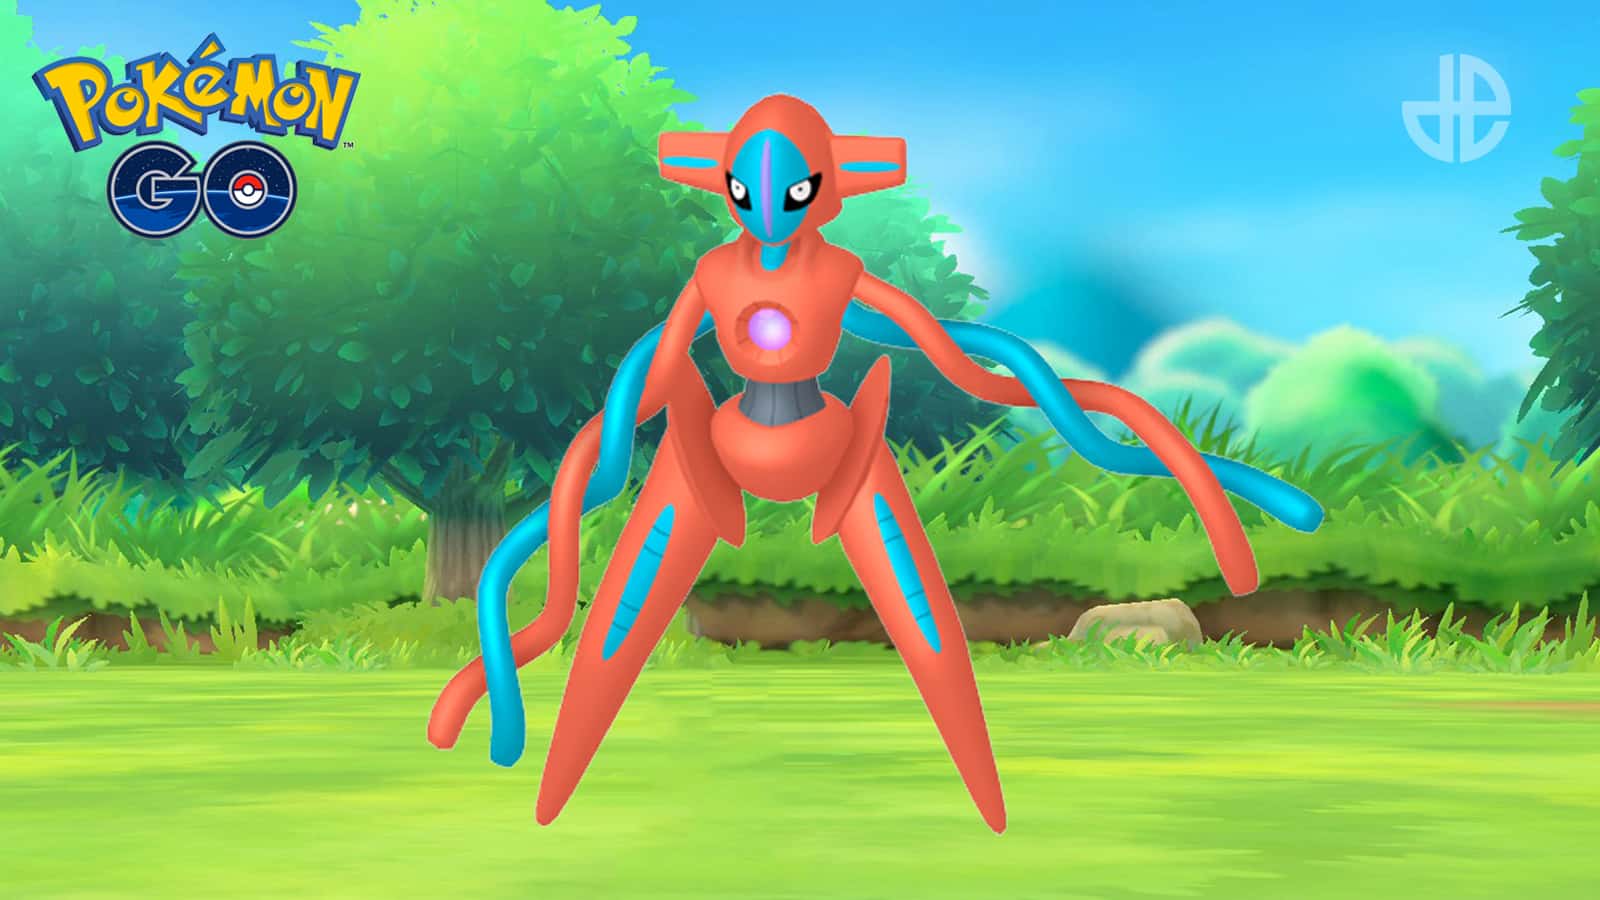 Deoxys normal forme appearing in Pokemon Go Raids